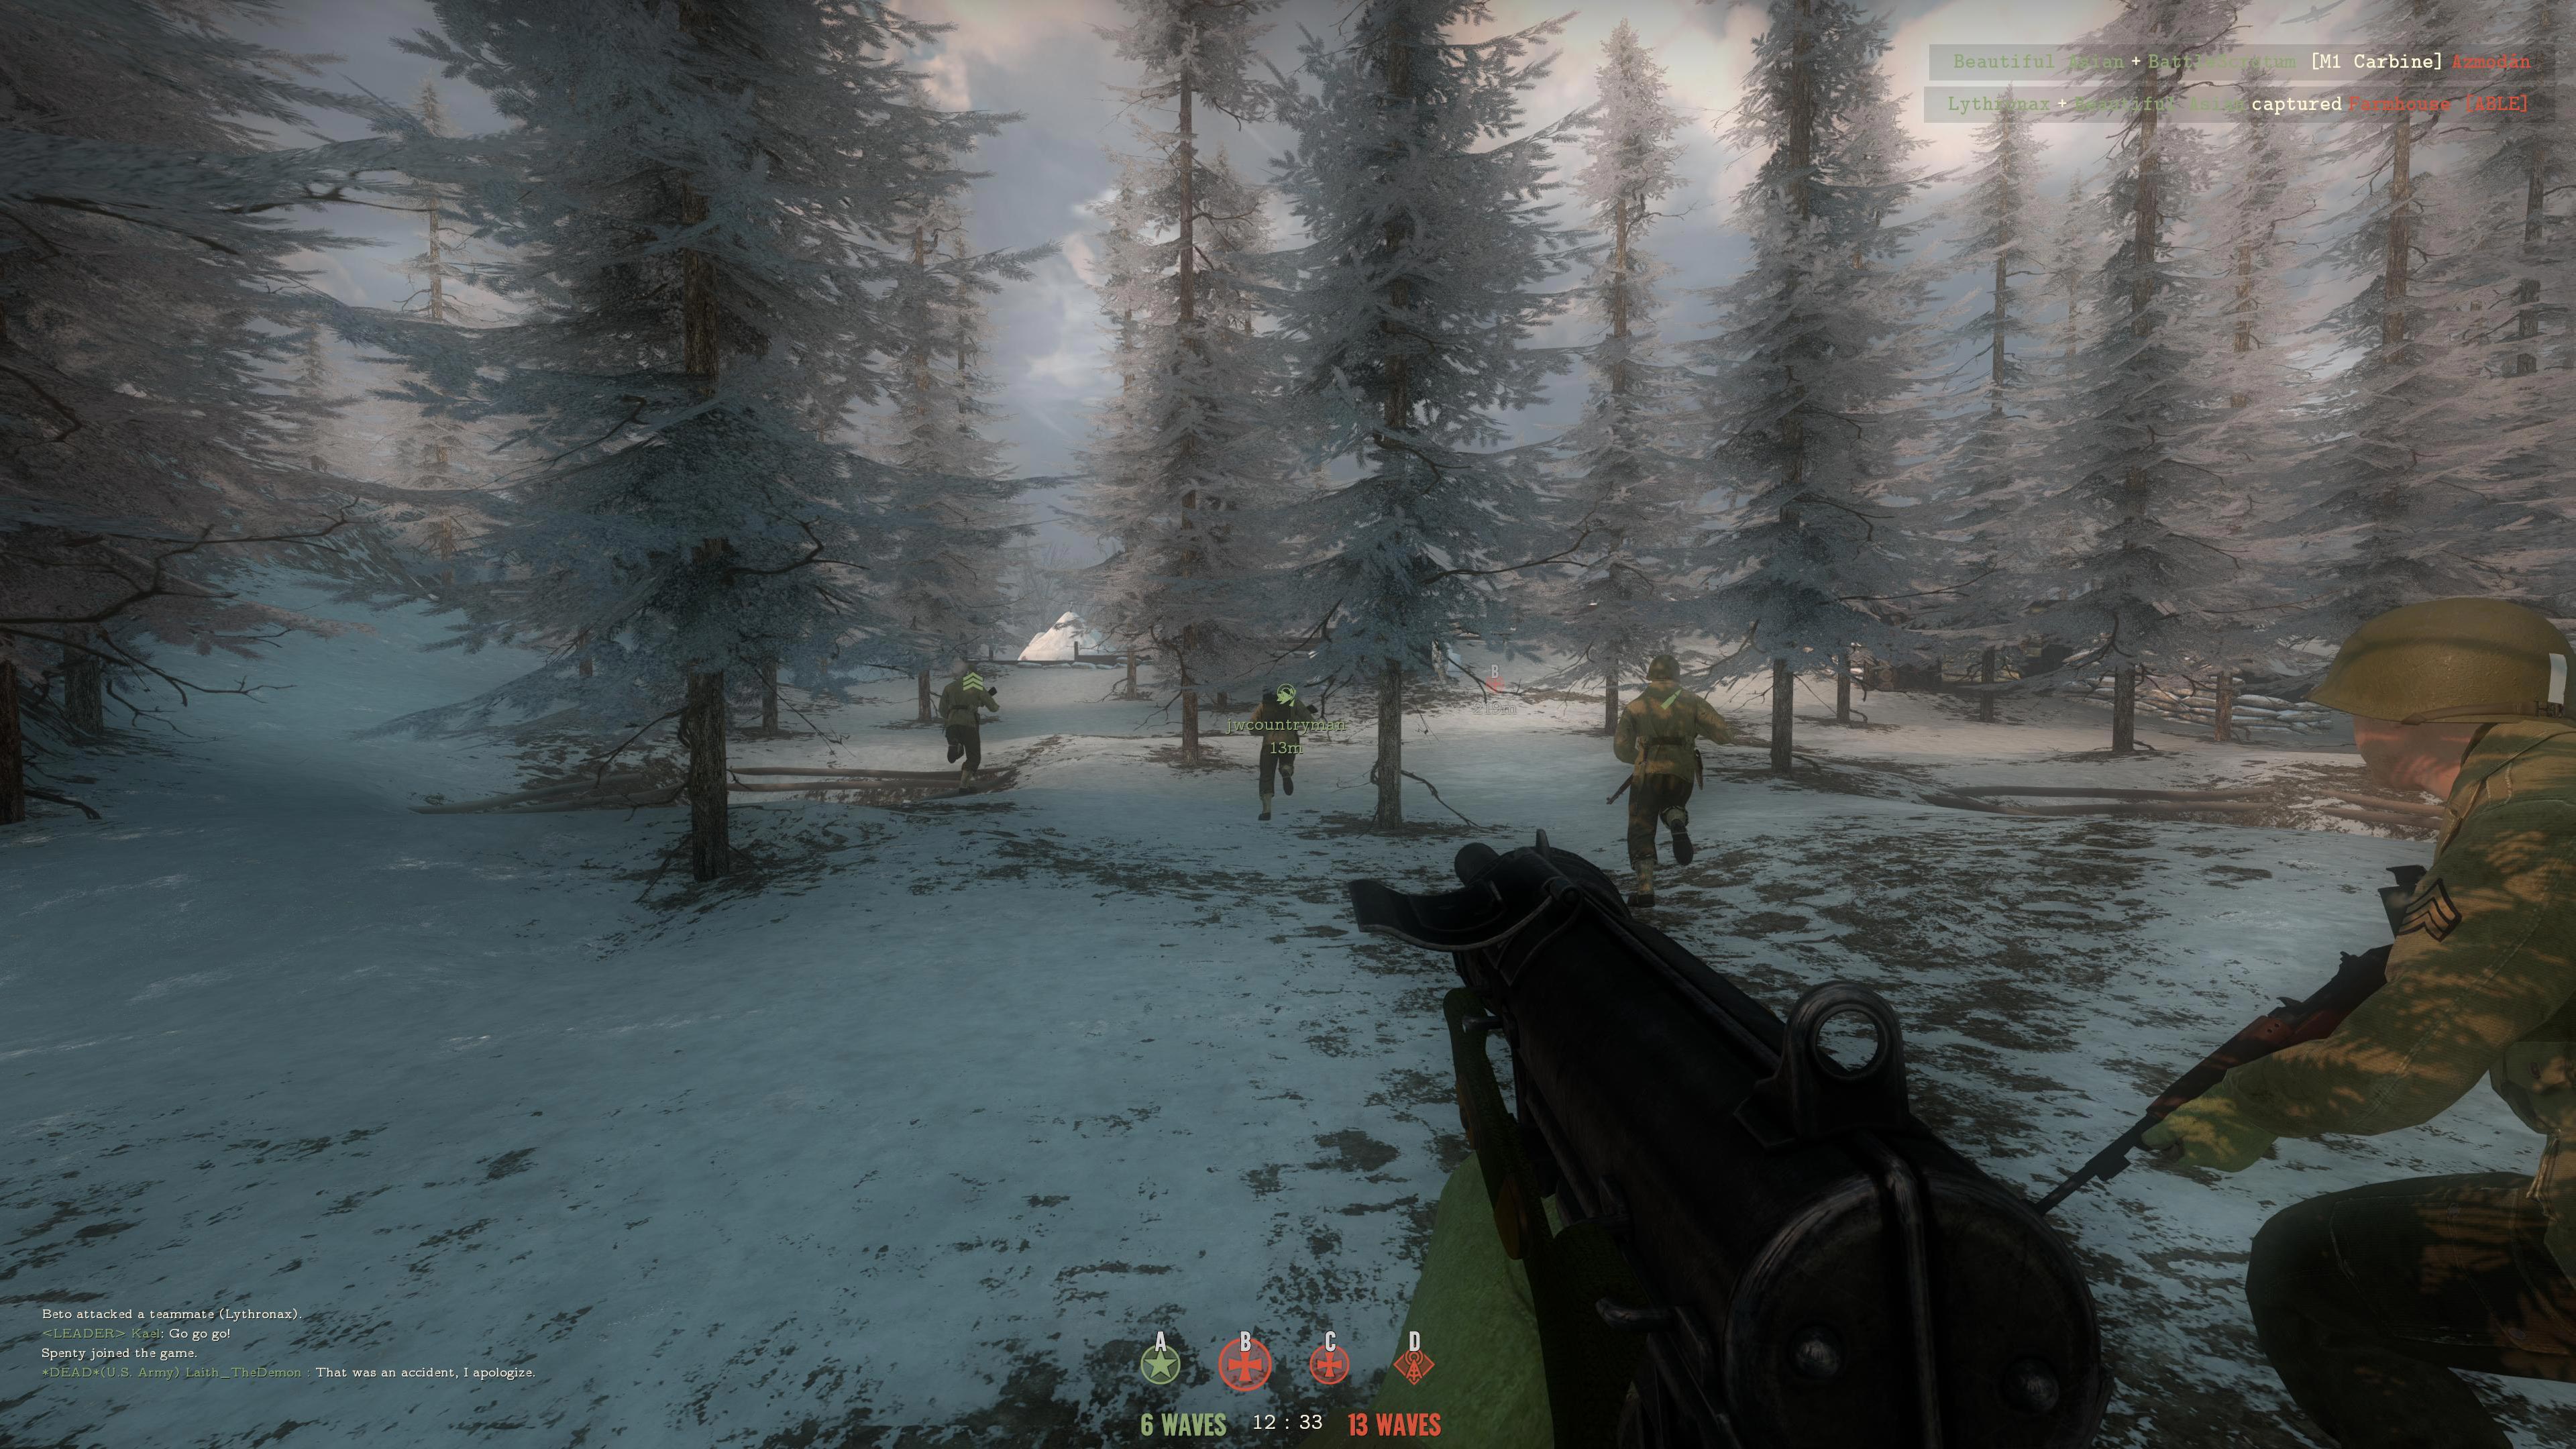 Day of Infamy Screenshot 4k of soldiers in snow